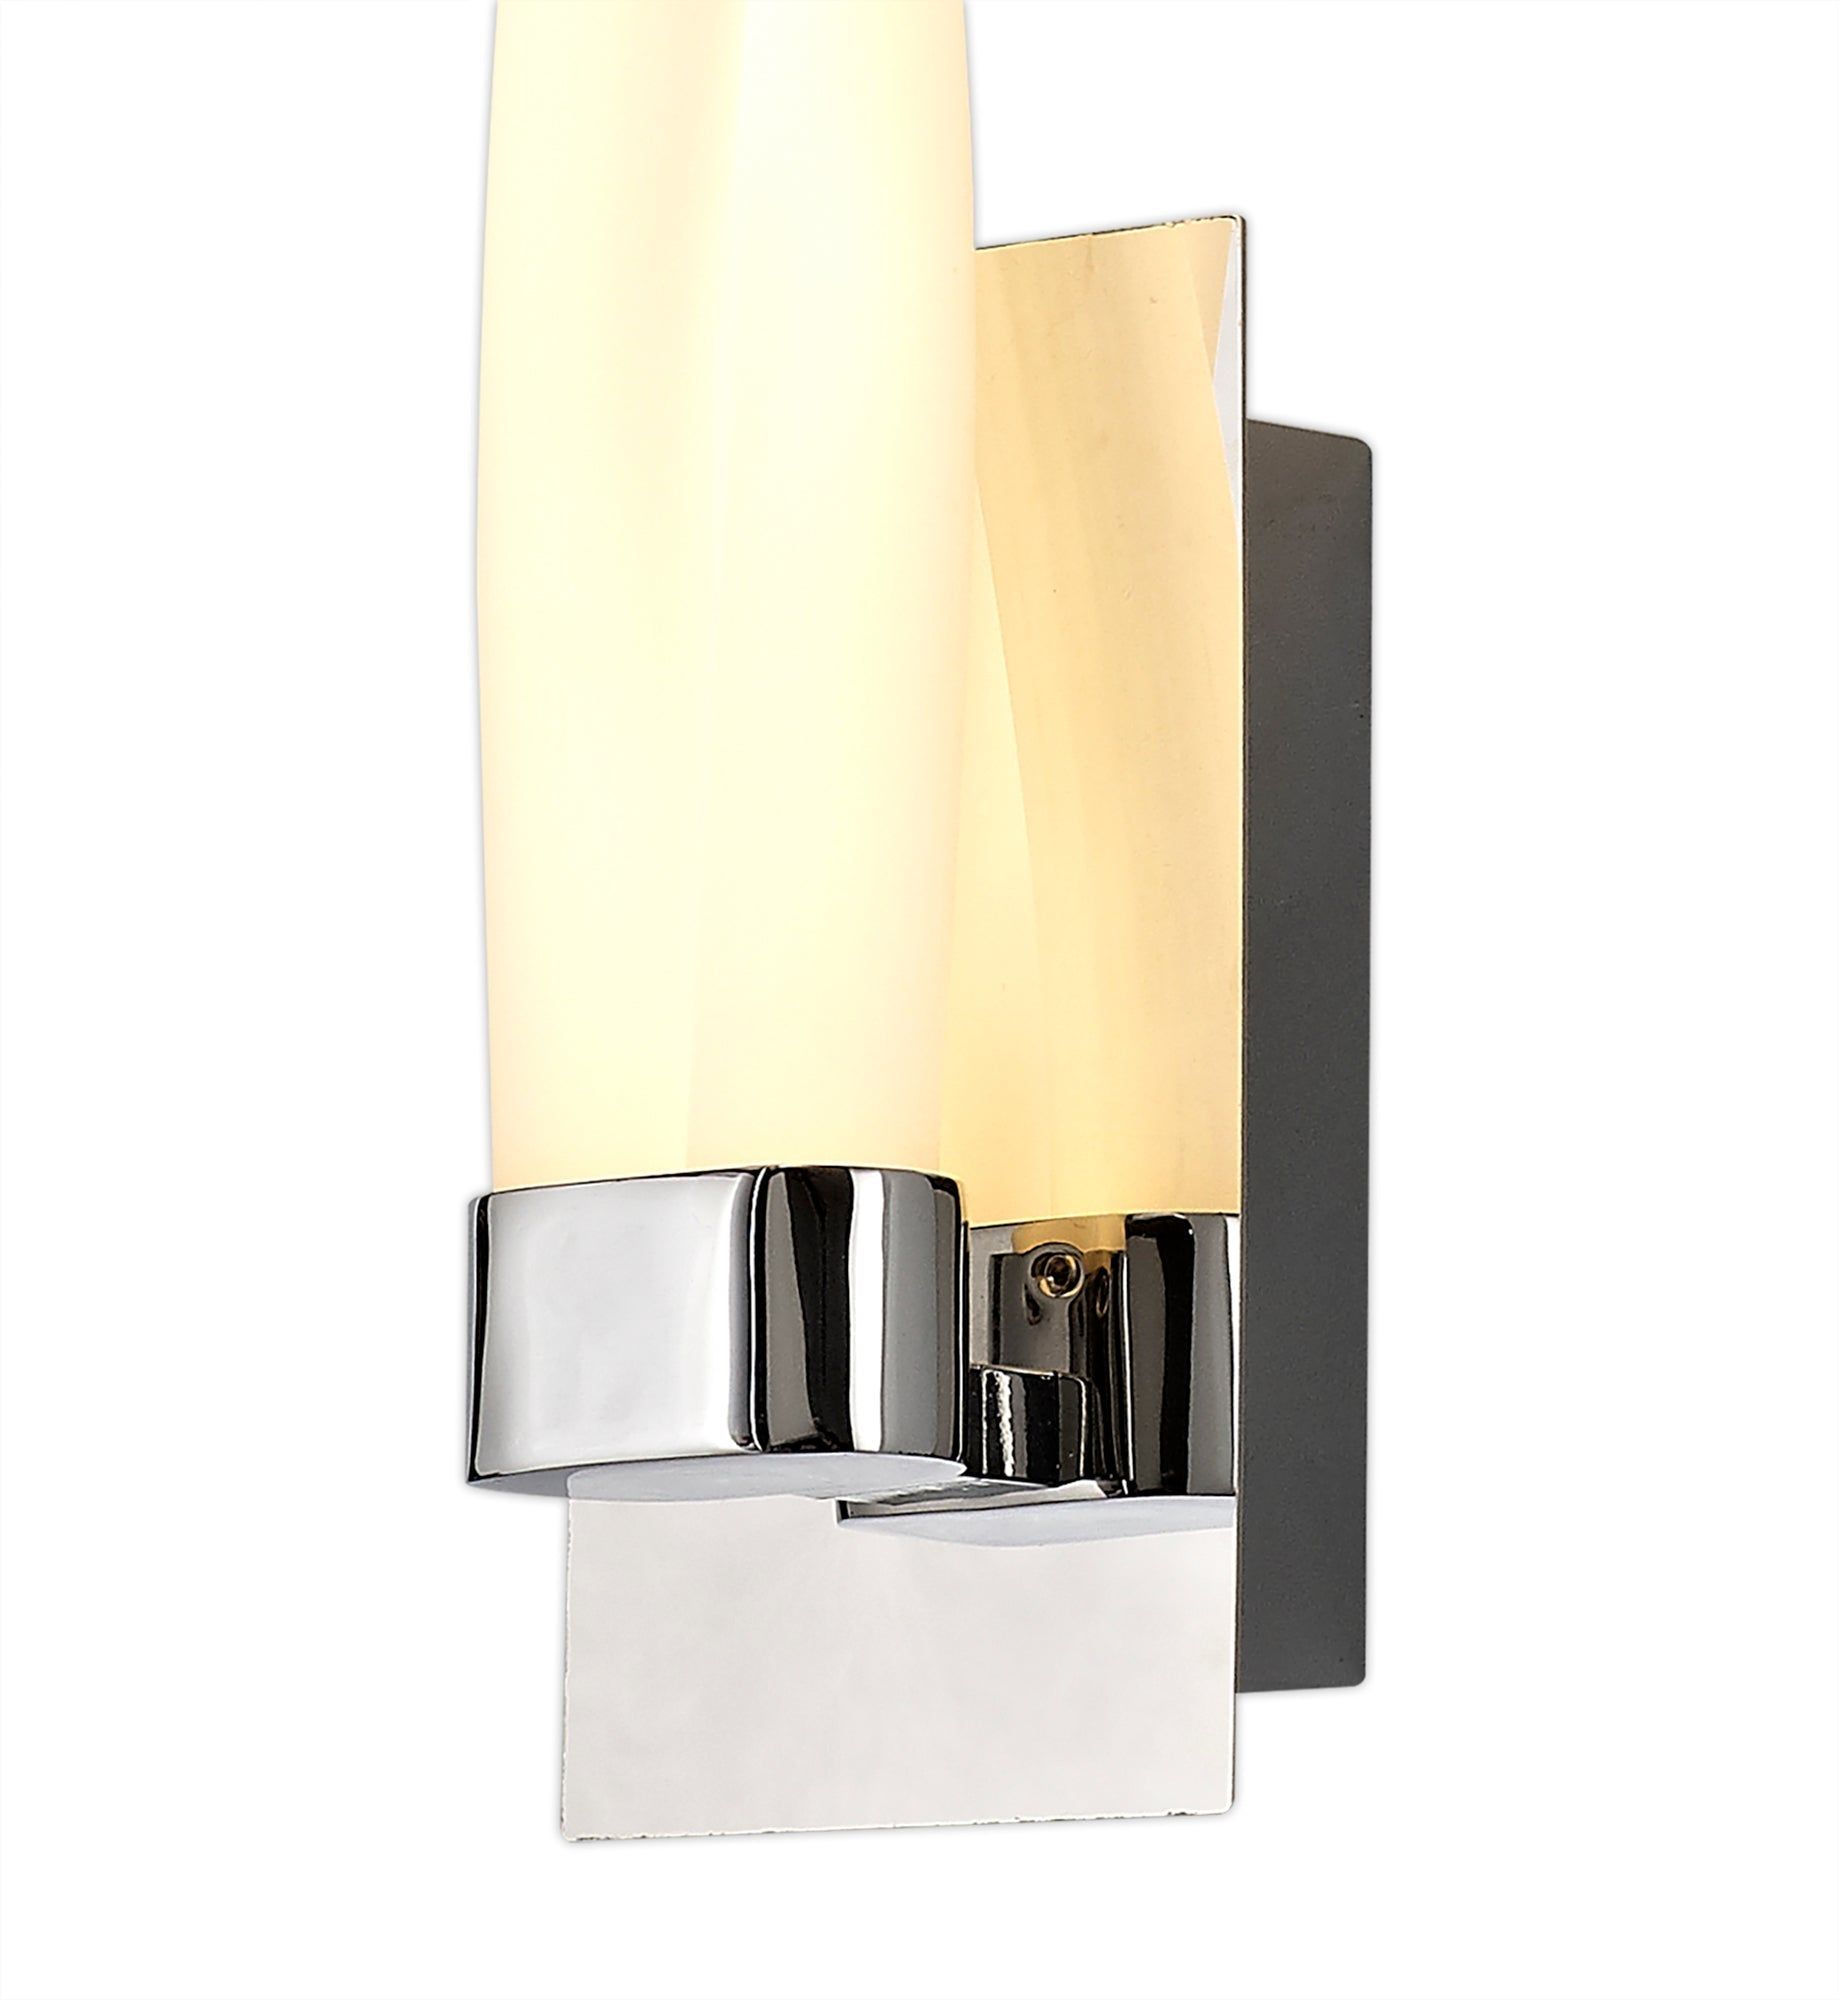 Stabser Wall Lamp Small, 2 x 5W LED, 3000K, 700lm, IP44, Polished Chrome, 3yrs Warranty